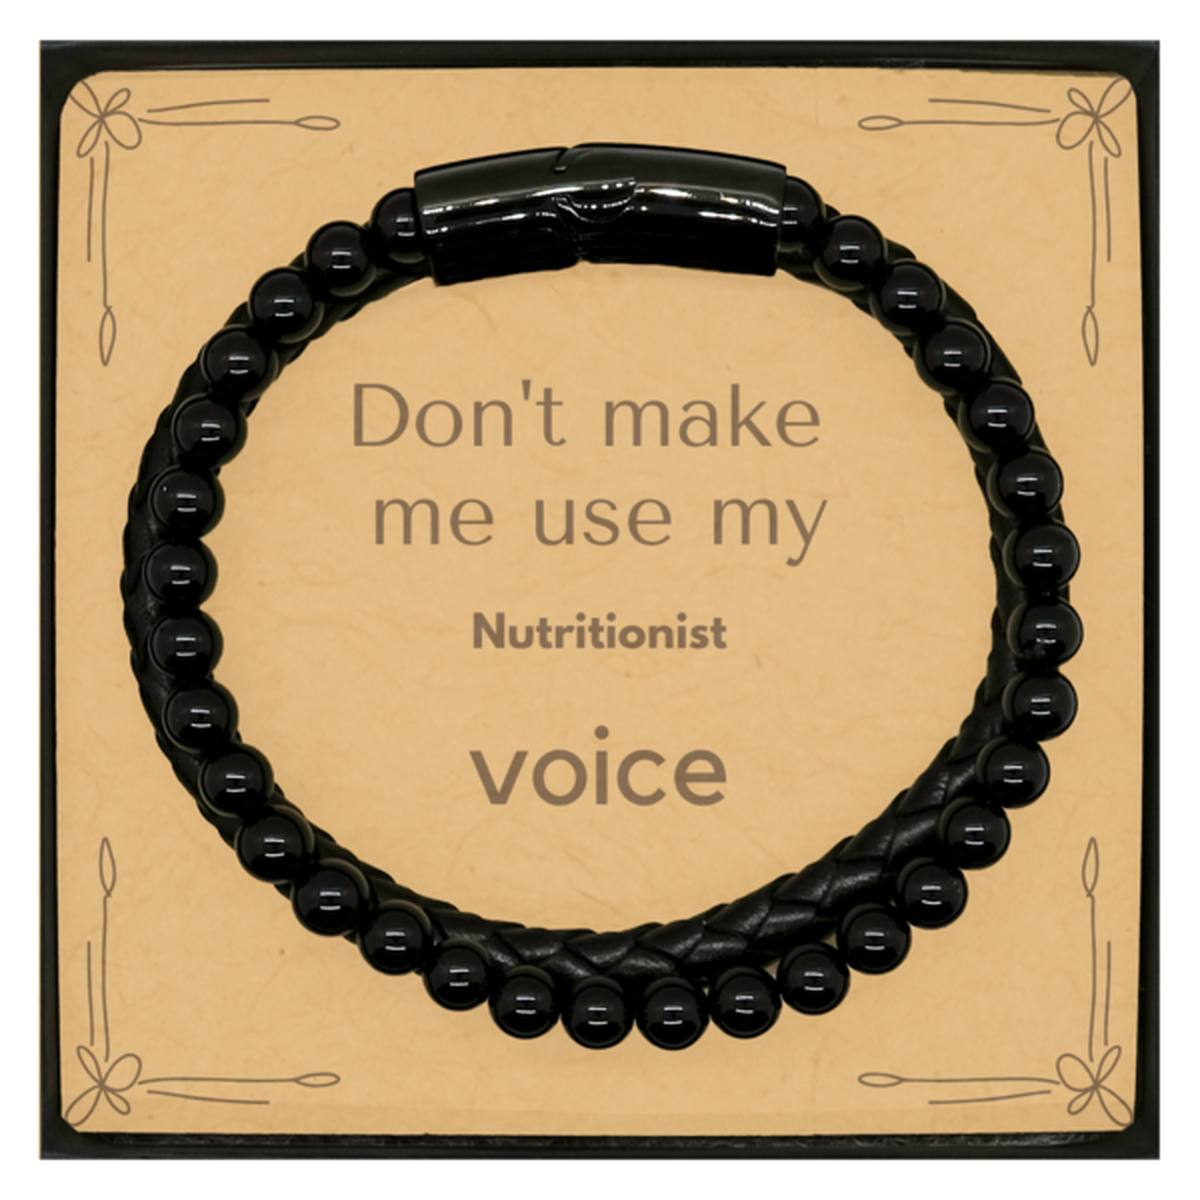 Don't make me use my Nutritionist voice, Sarcasm Nutritionist Card Gifts, Christmas Nutritionist Stone Leather Bracelets Birthday Unique Gifts For Nutritionist Coworkers, Men, Women, Colleague, Friends